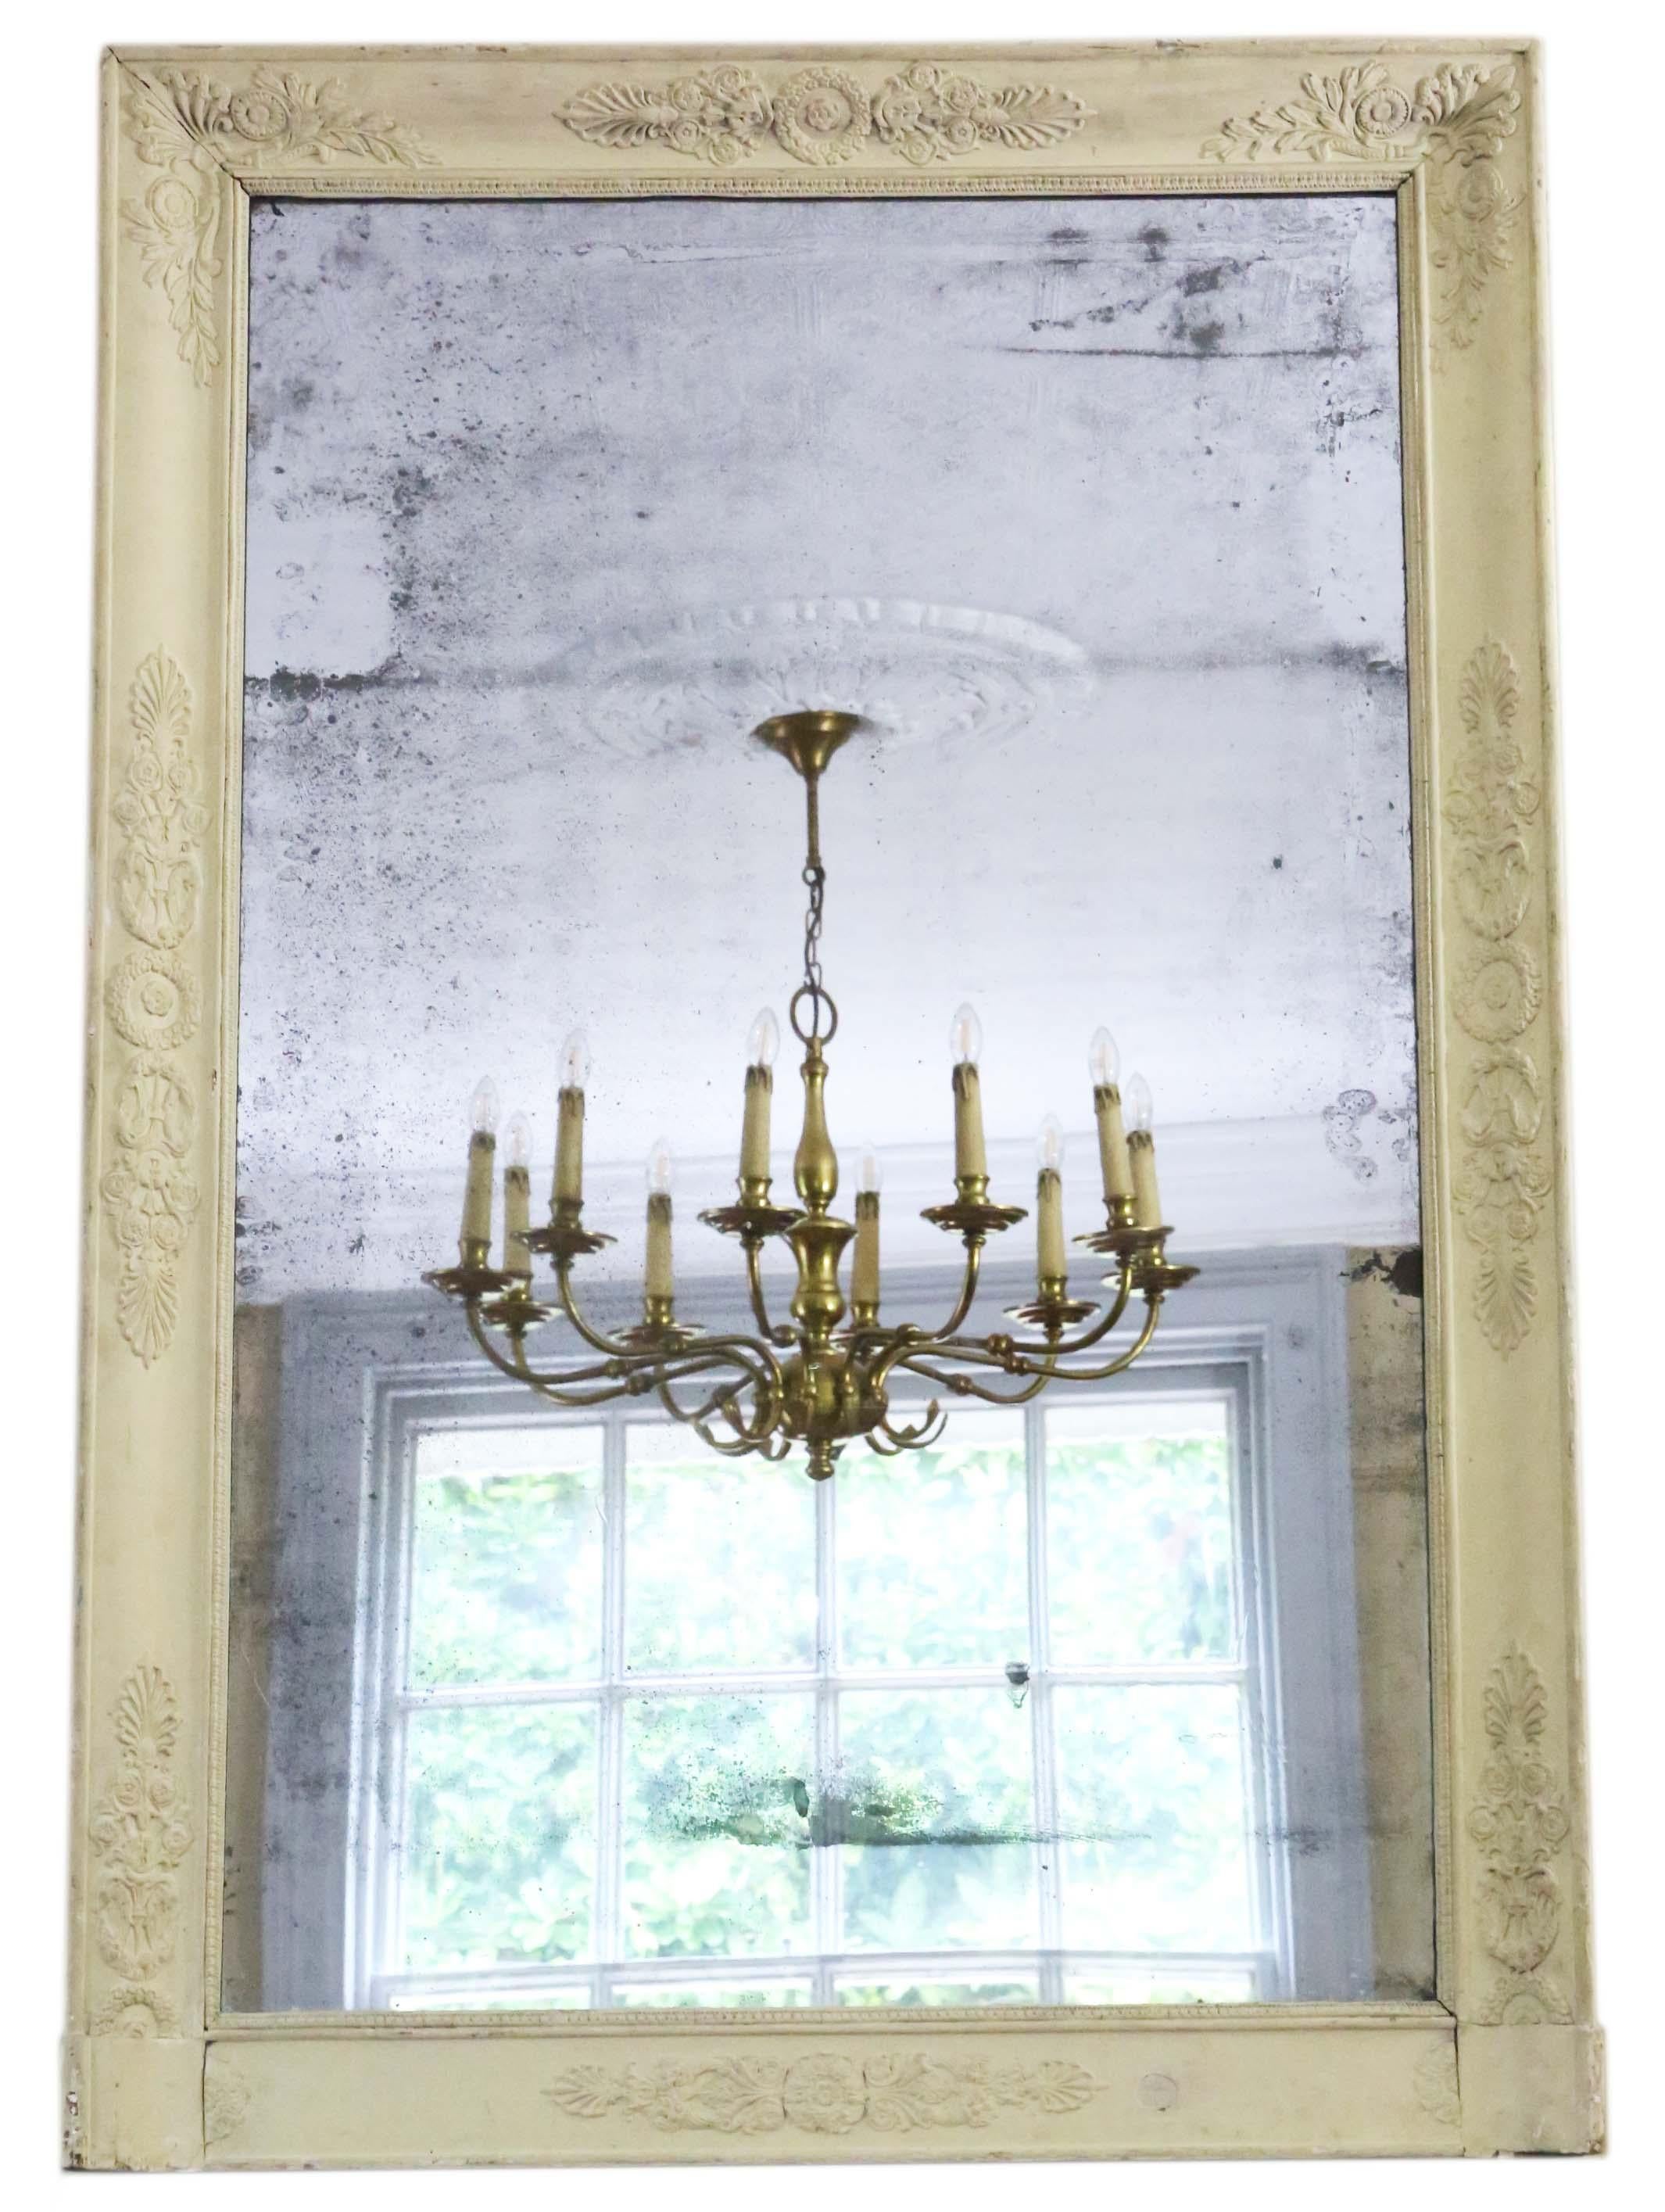 Antique large quality French painted wall overmantle mirror 19th Century.

An impressive and very rare find, that would look amazing in the right location. No loose joints or woodworm. Original panelled back.

Lovely old faded paint finish with